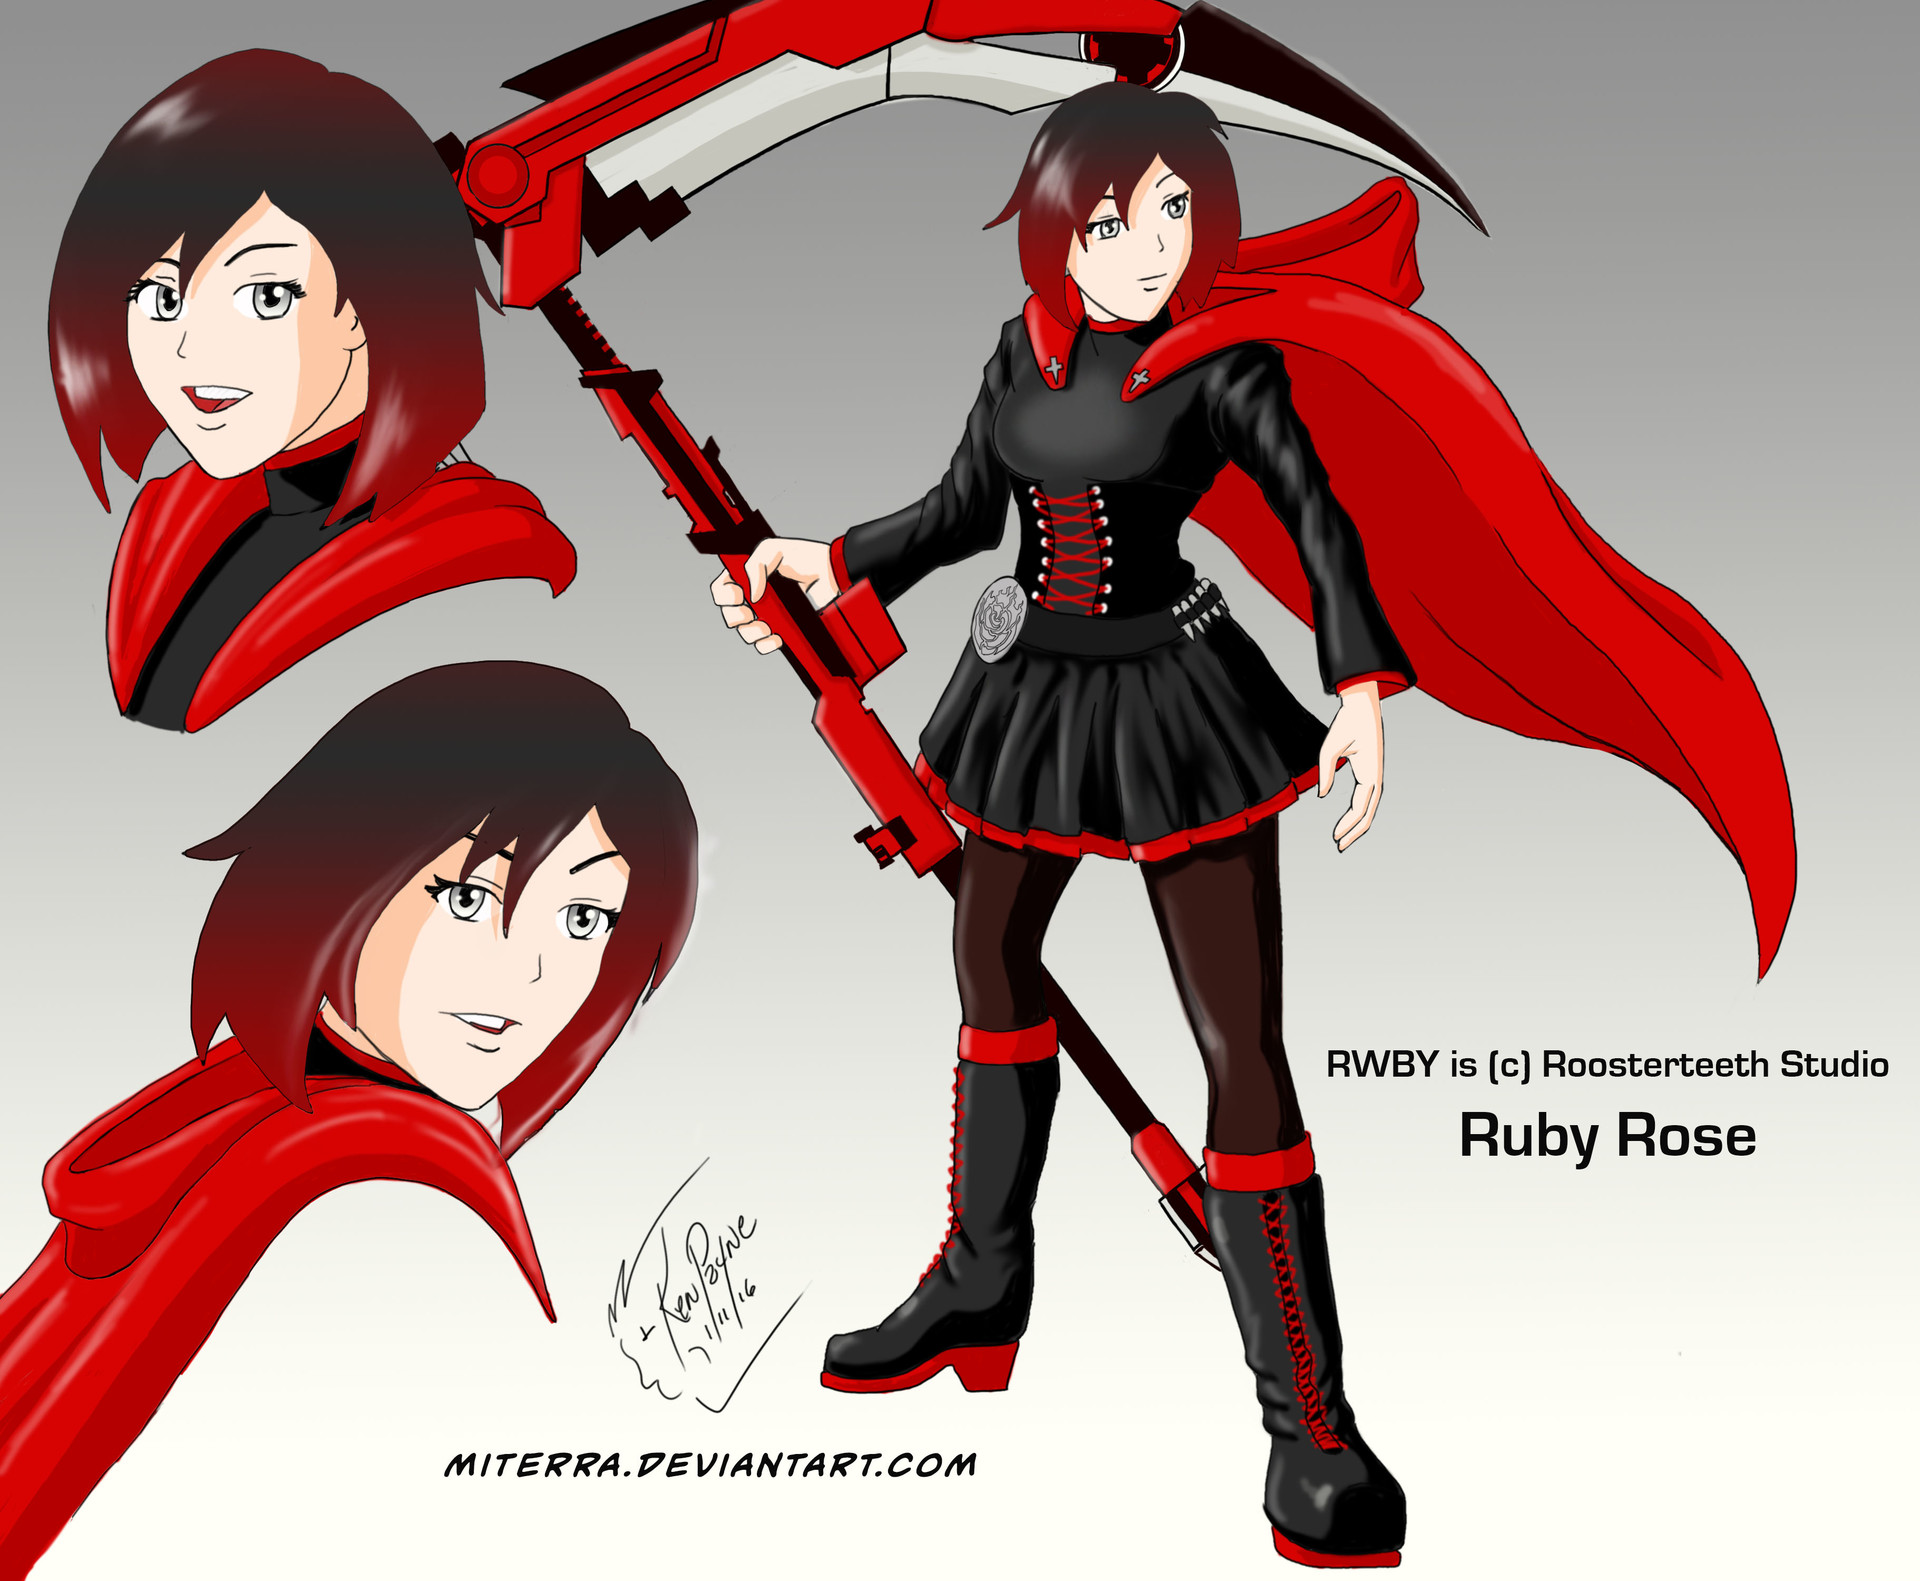 Male ruby rose,cold rune, aura master and powerful semblance rune. 